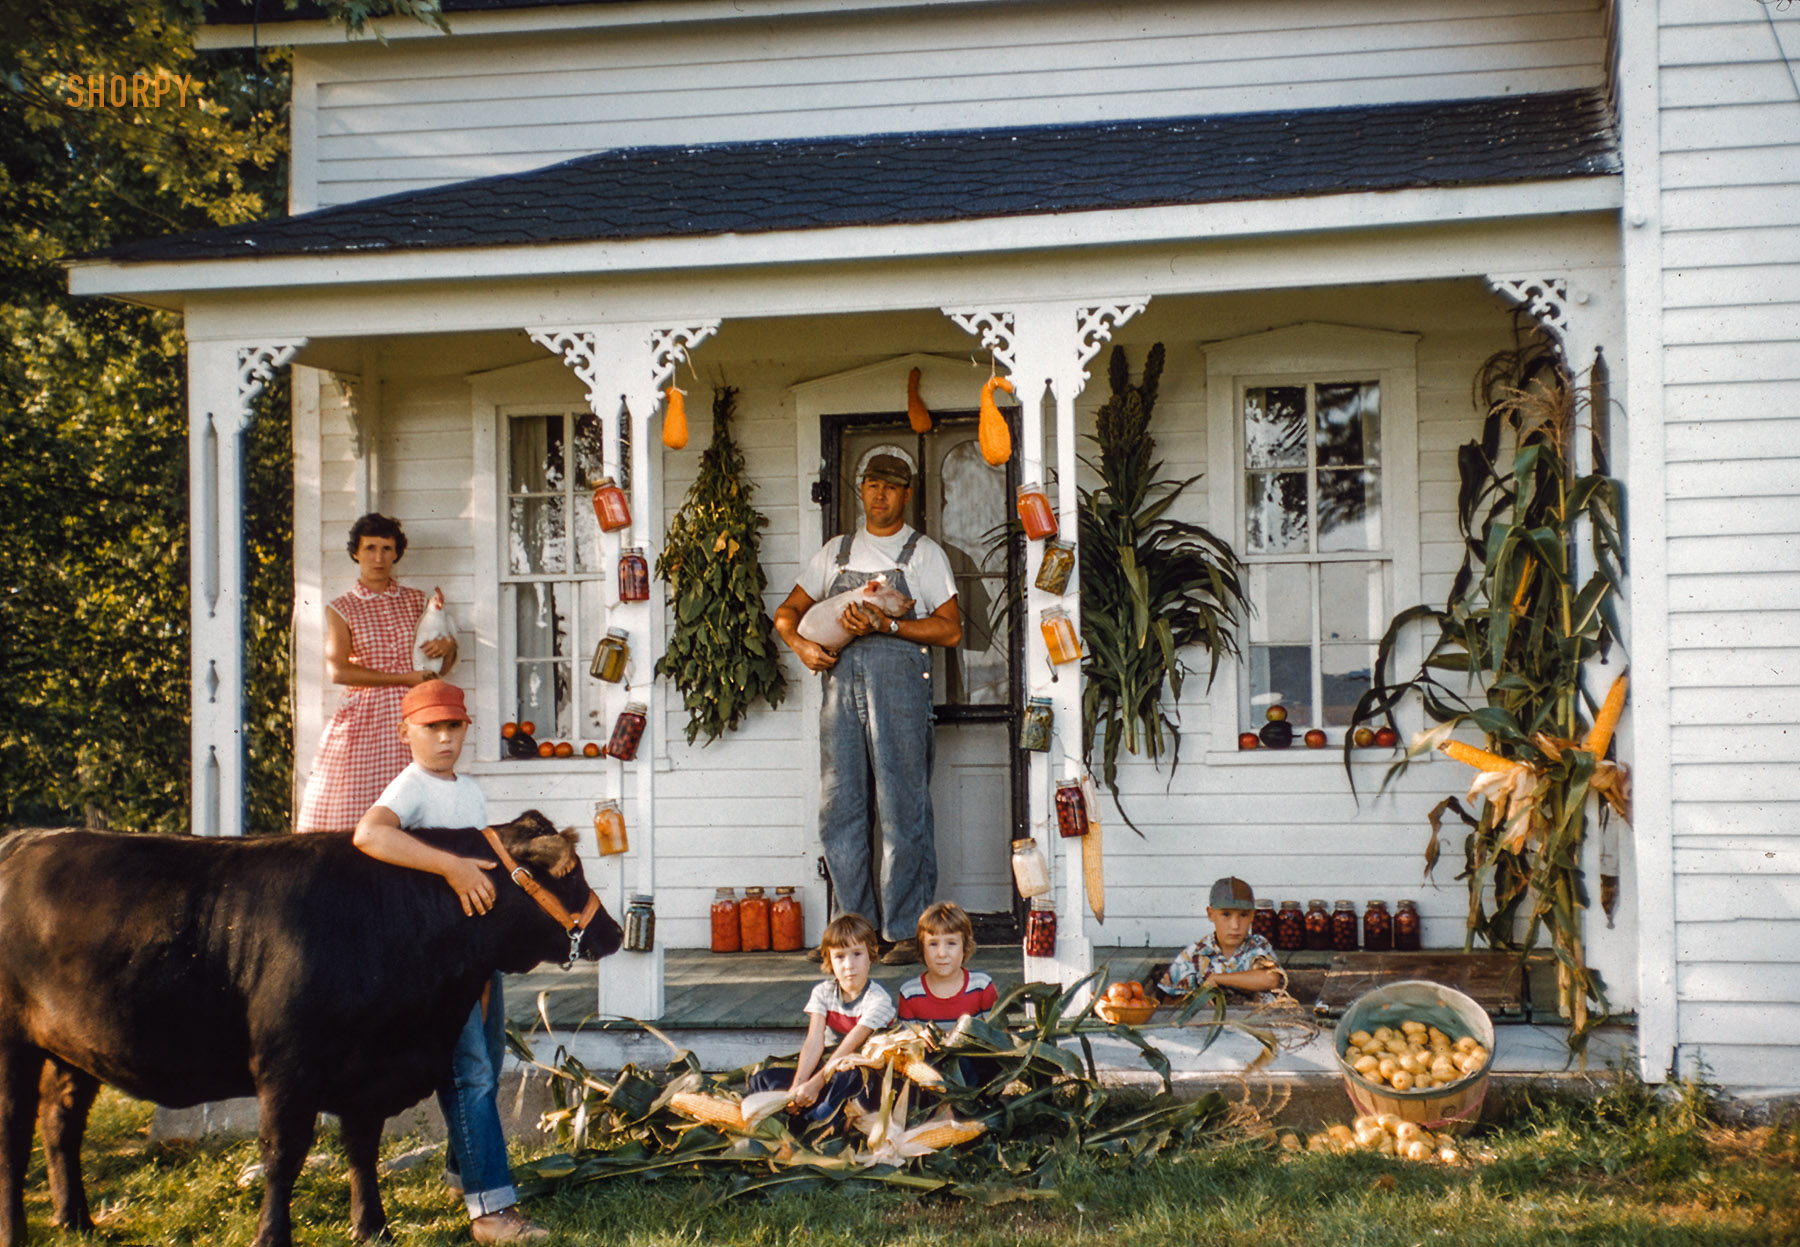 September 1957. "The Willis Cooper family on the front porch of their farmhouse near Radcliffe, Iowa, surrounded by animals and foods." 35mm color transparency from photos by Jim Hansen for the Look magazine assignment "Iowa family." View full size.